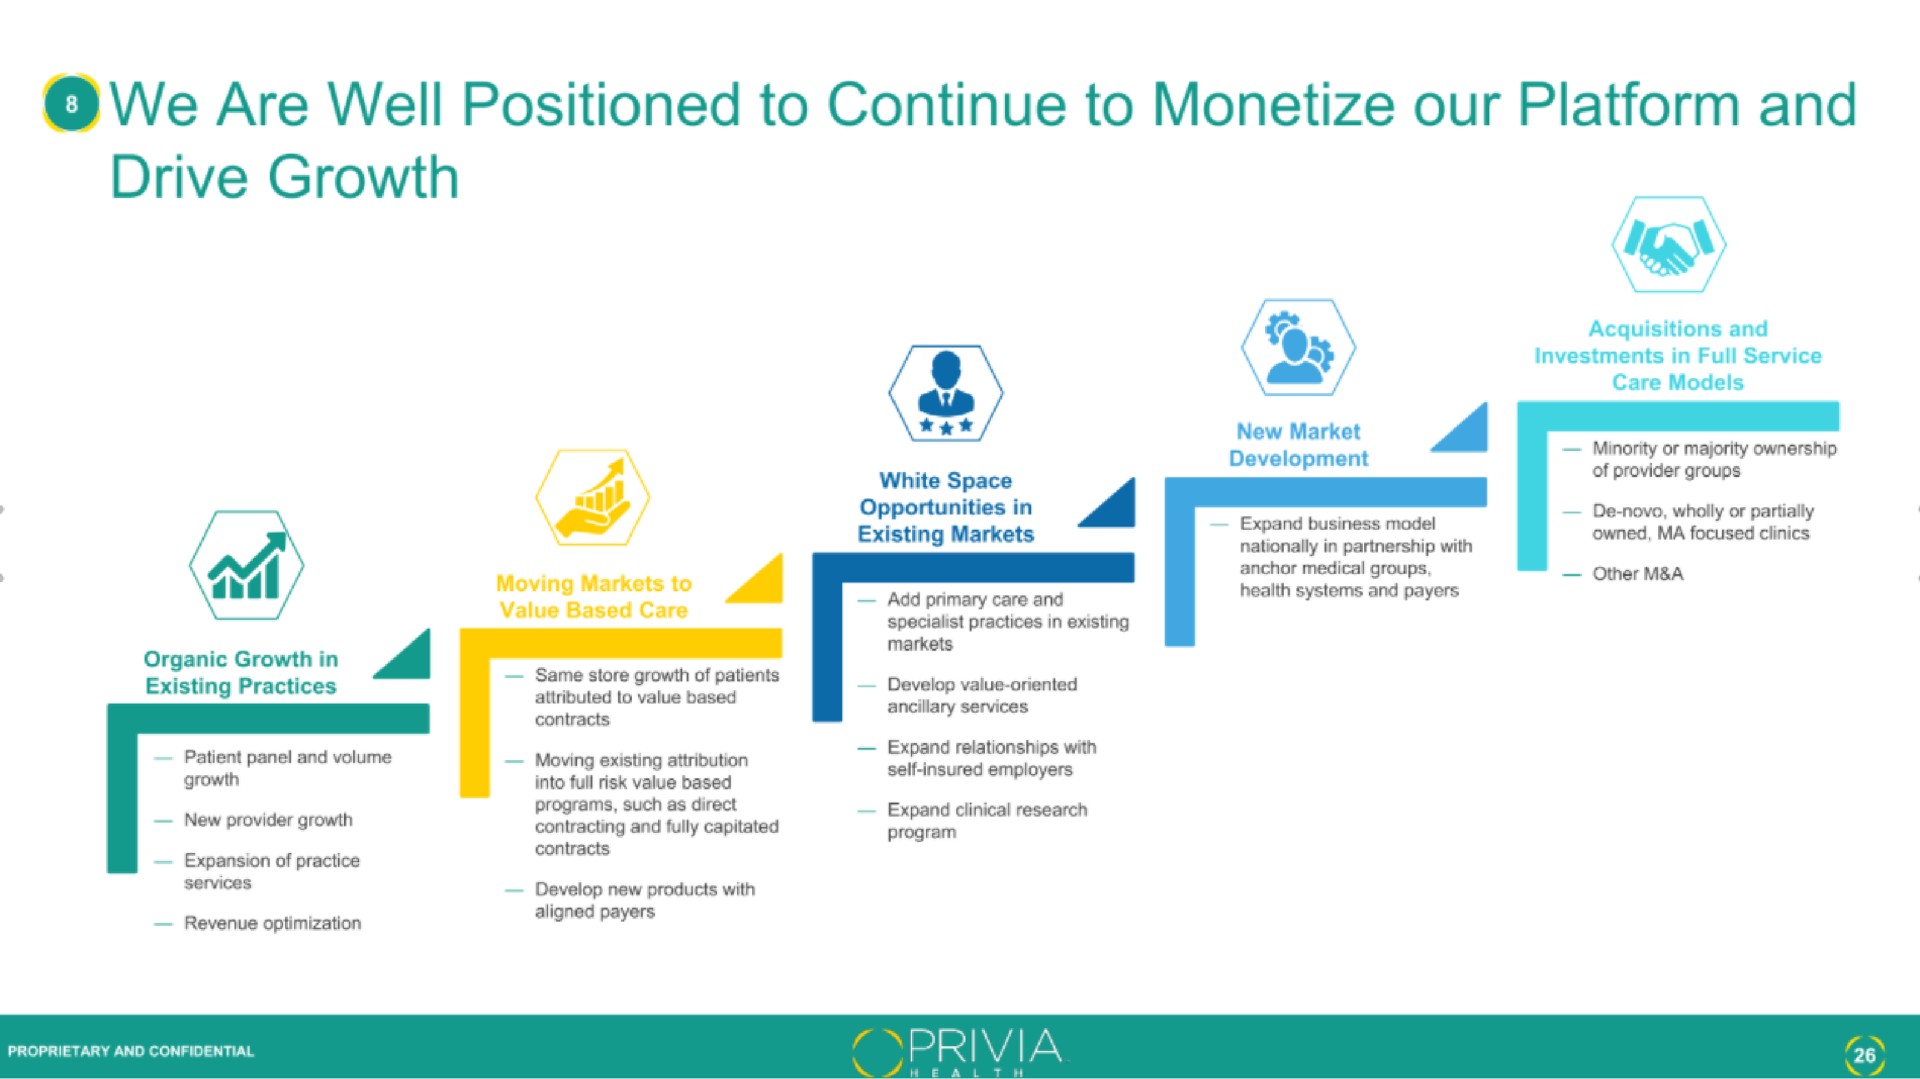 owe are well positioned to continue to monetize our platform and drive growth | Privia Health